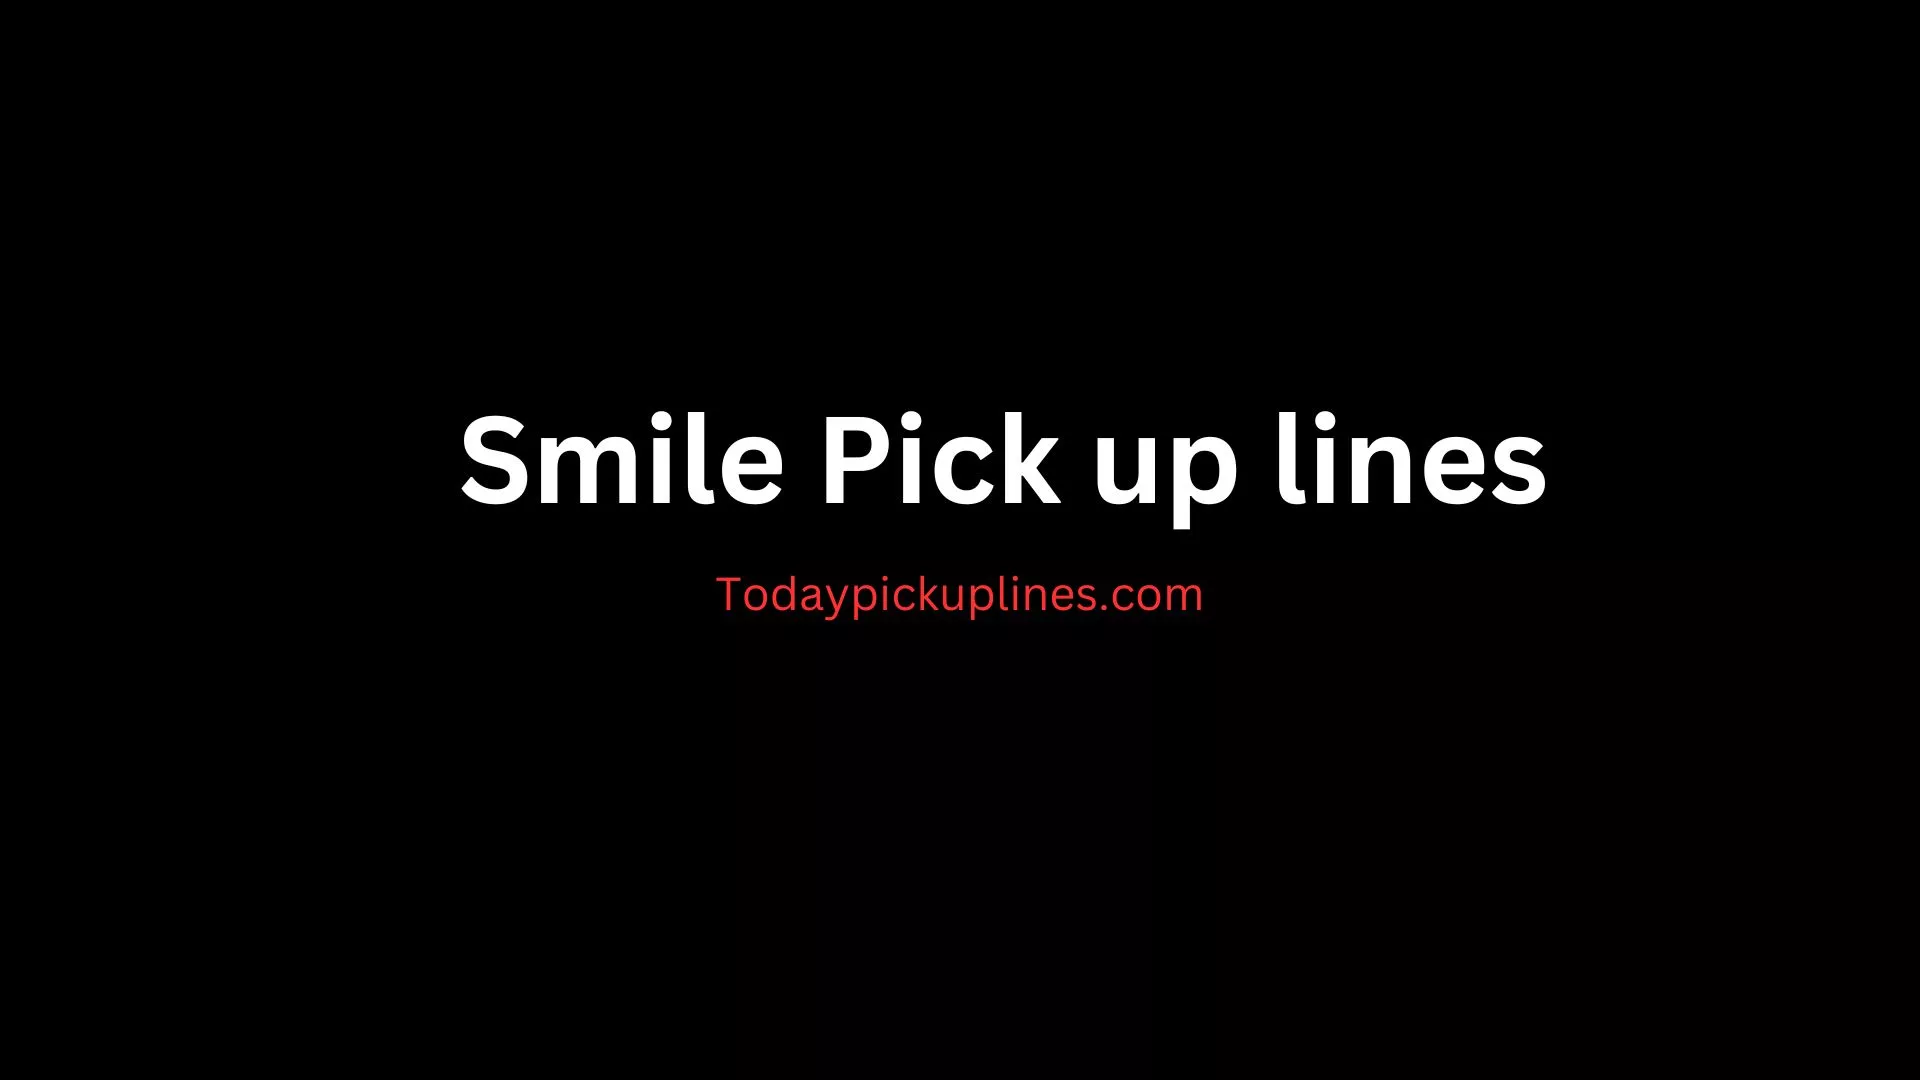 Smile Pick up lines